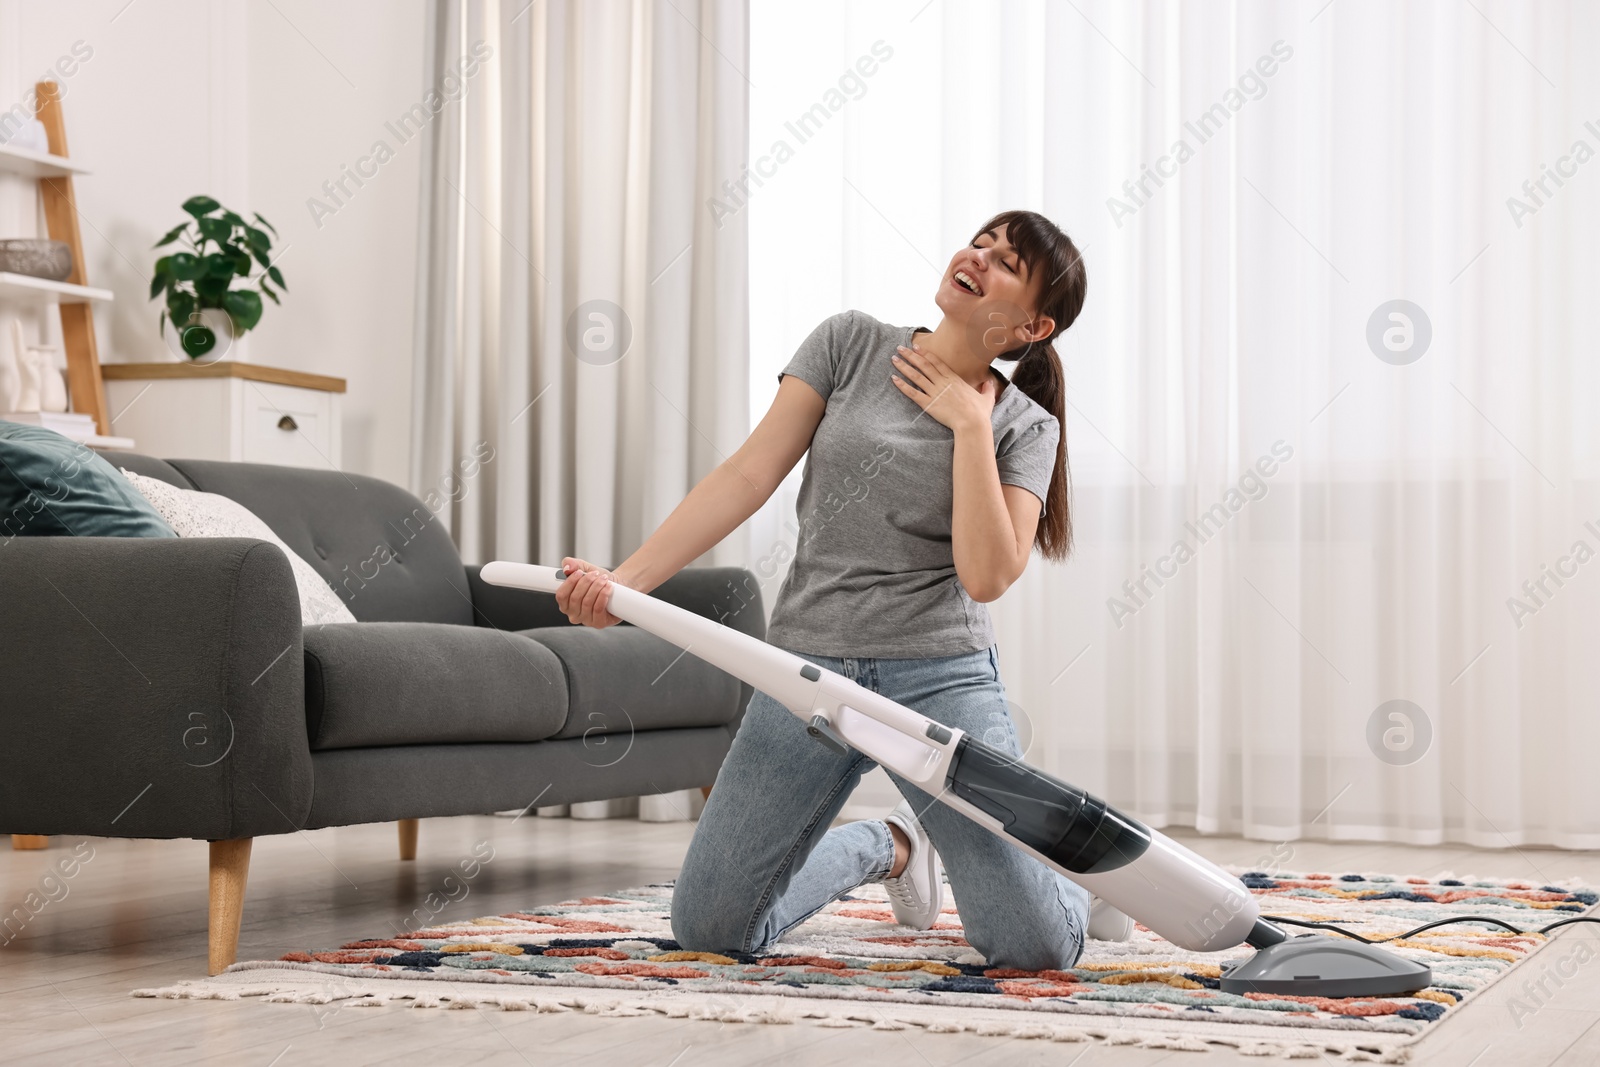 Photo of Happy young housewife having fun while cleaning at home